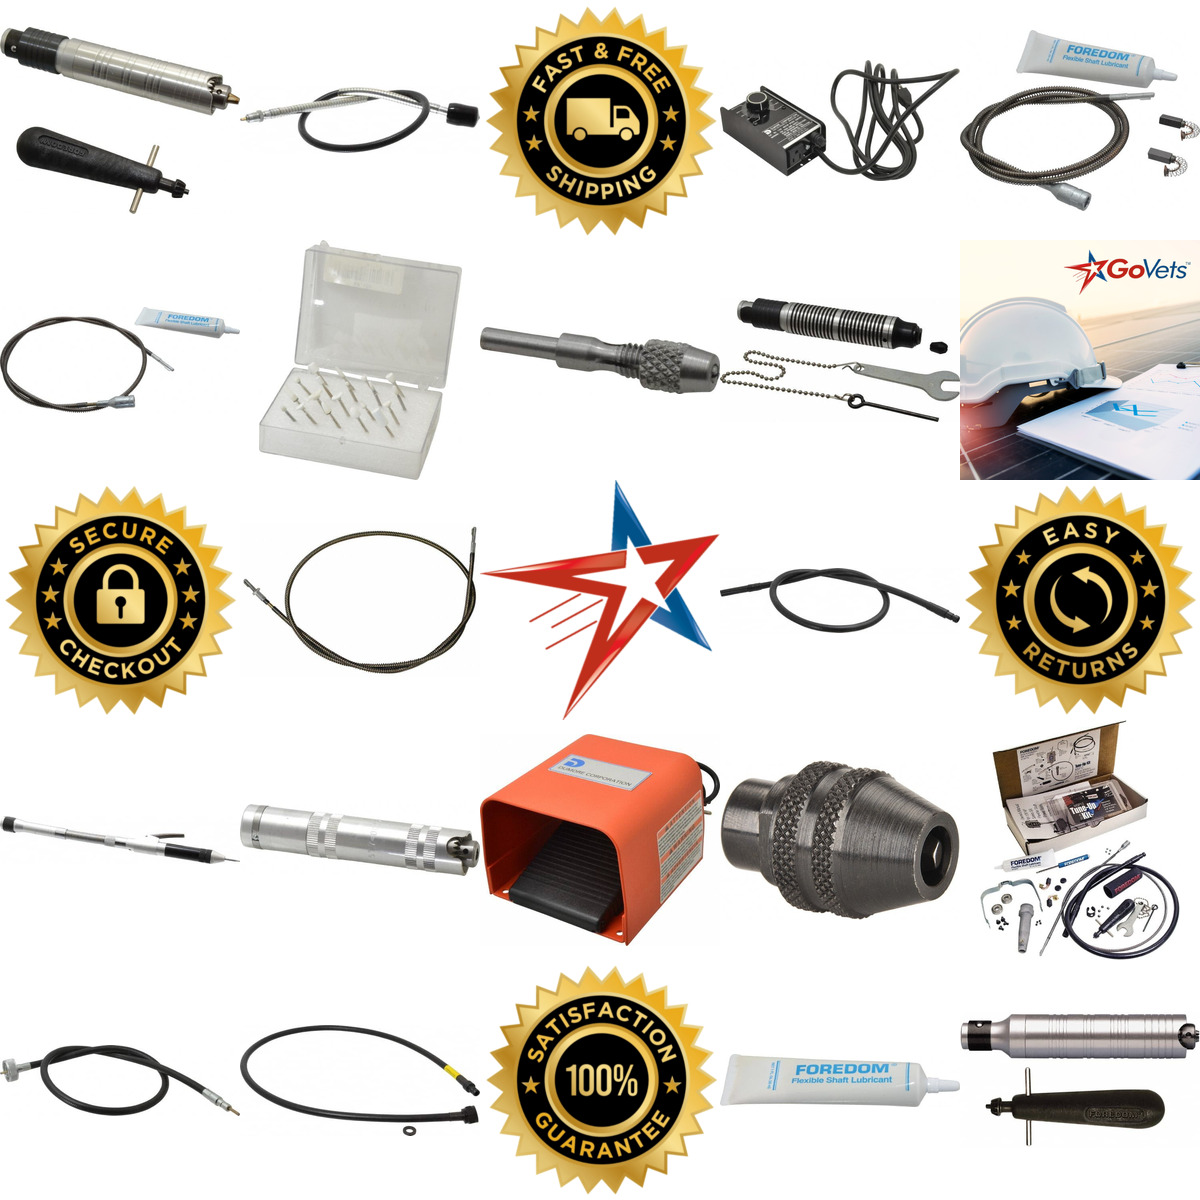 A selection of Flexible Shaft Grinder Accessories products on GoVets